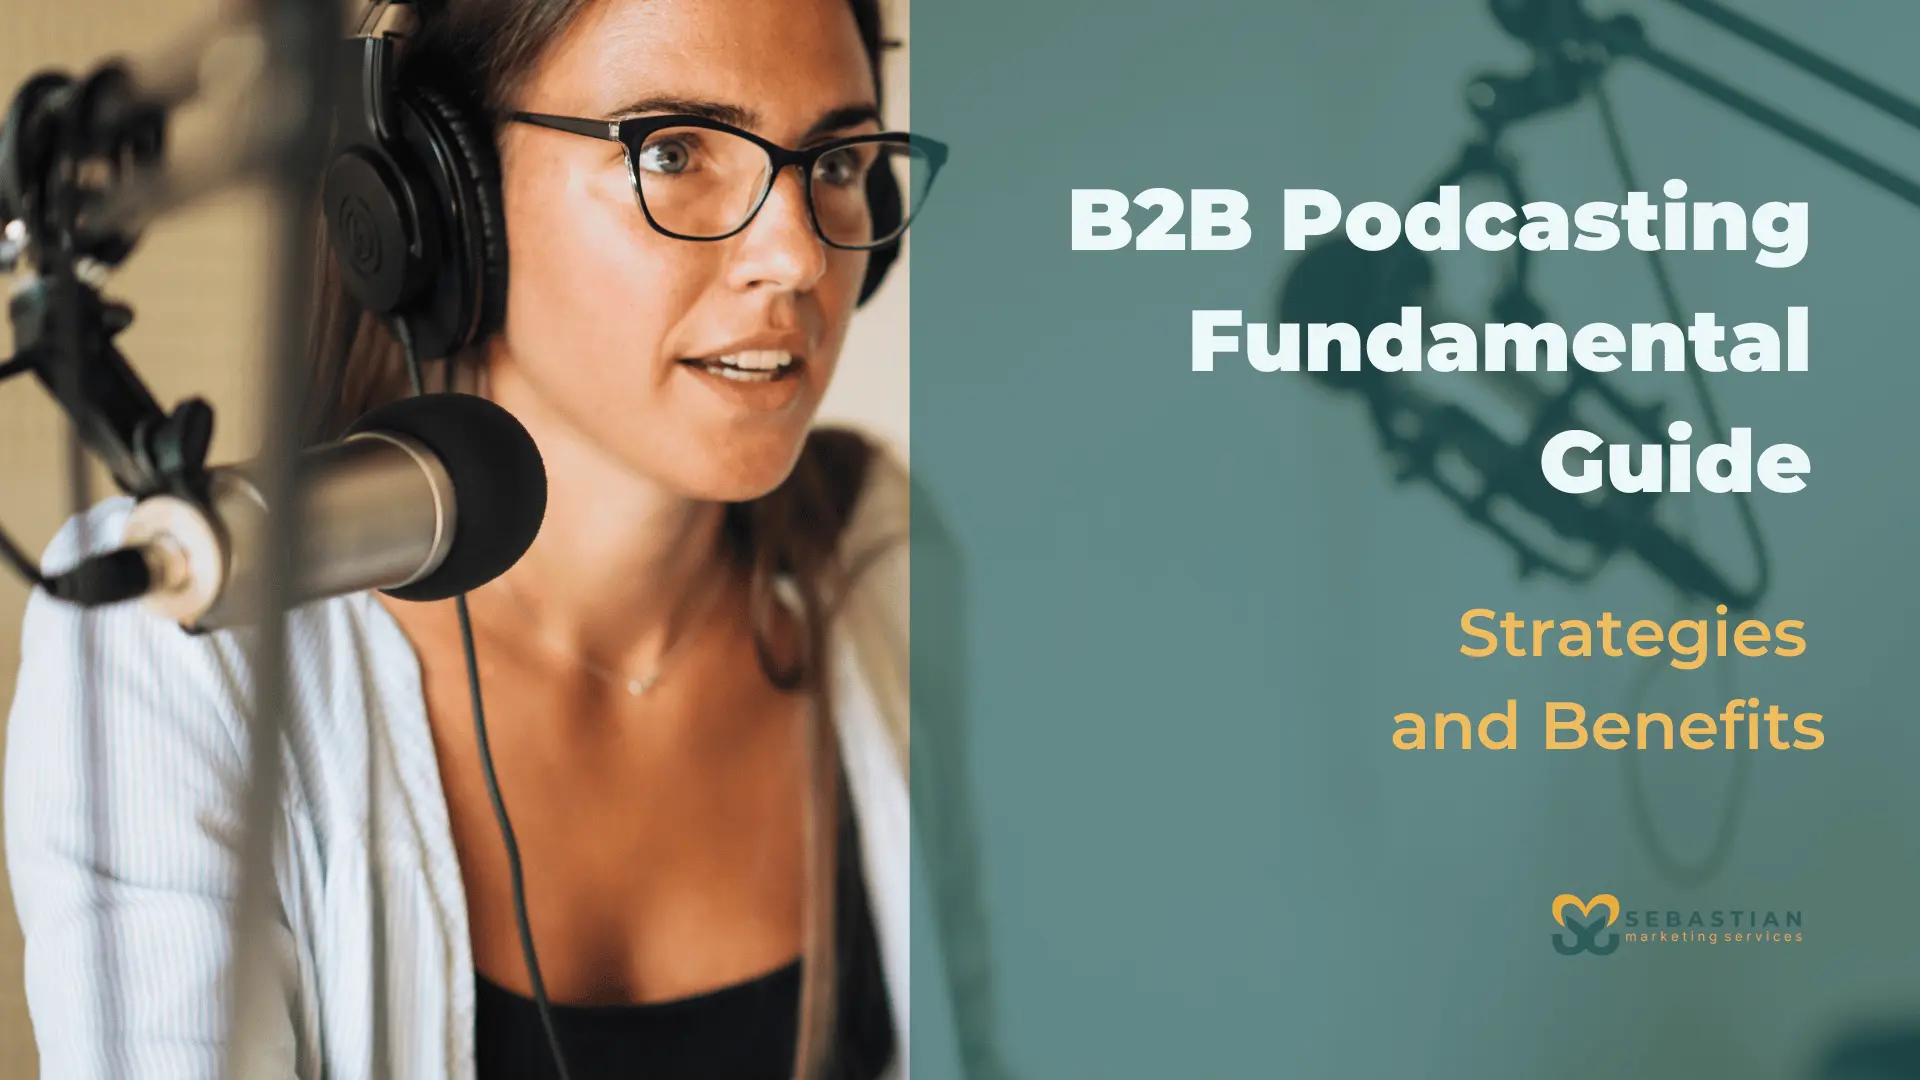 B2B Podcasting Fundamental Guide - Strategies and Benefits